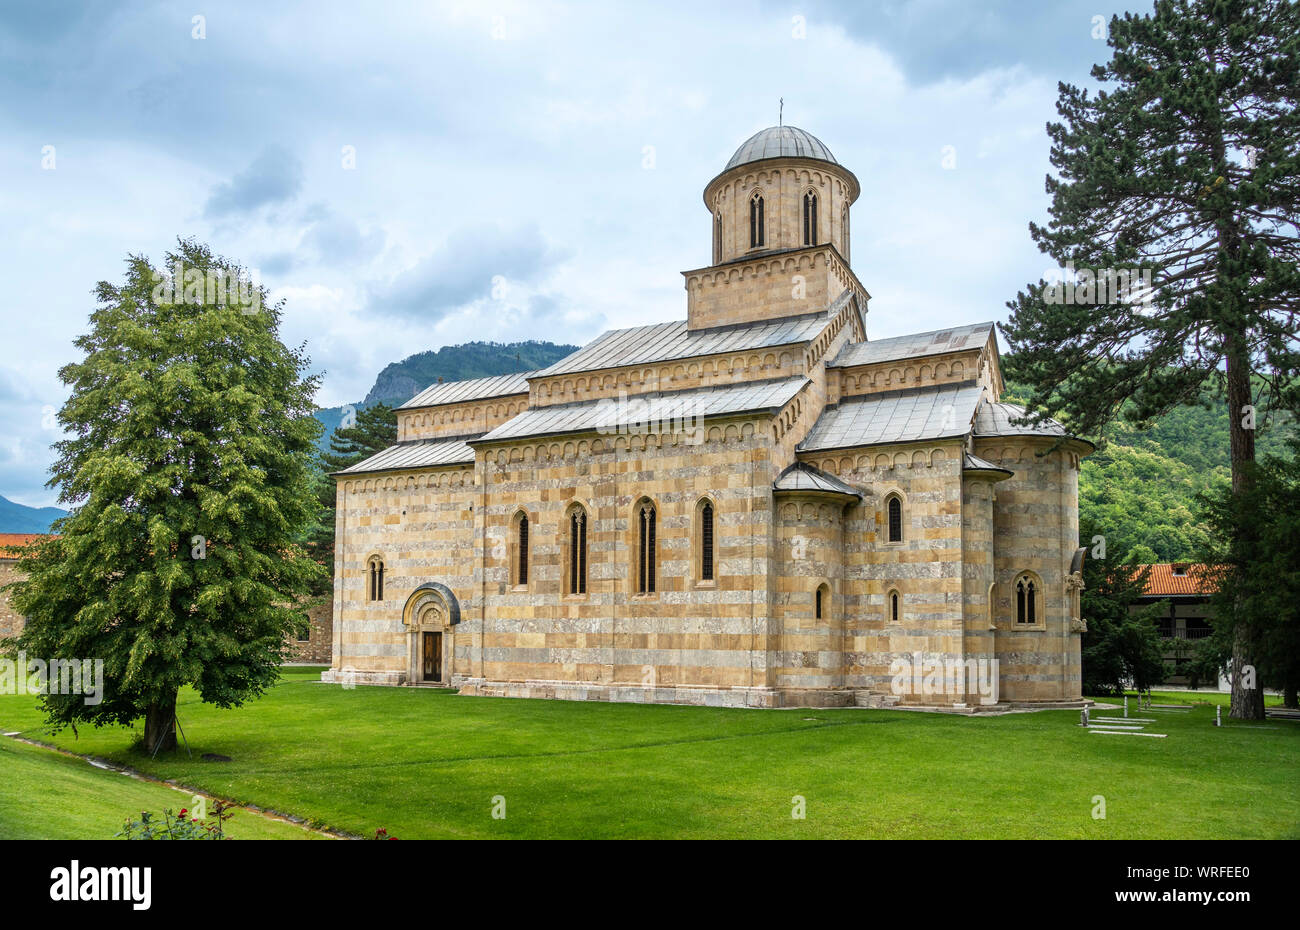 The Serbian Orthodox Monastery of Visoki Dečani,  founded in the first half of the 14th century by Serbian king Stefan Dečanski.  near Deçan in Kosovo Stock Photo